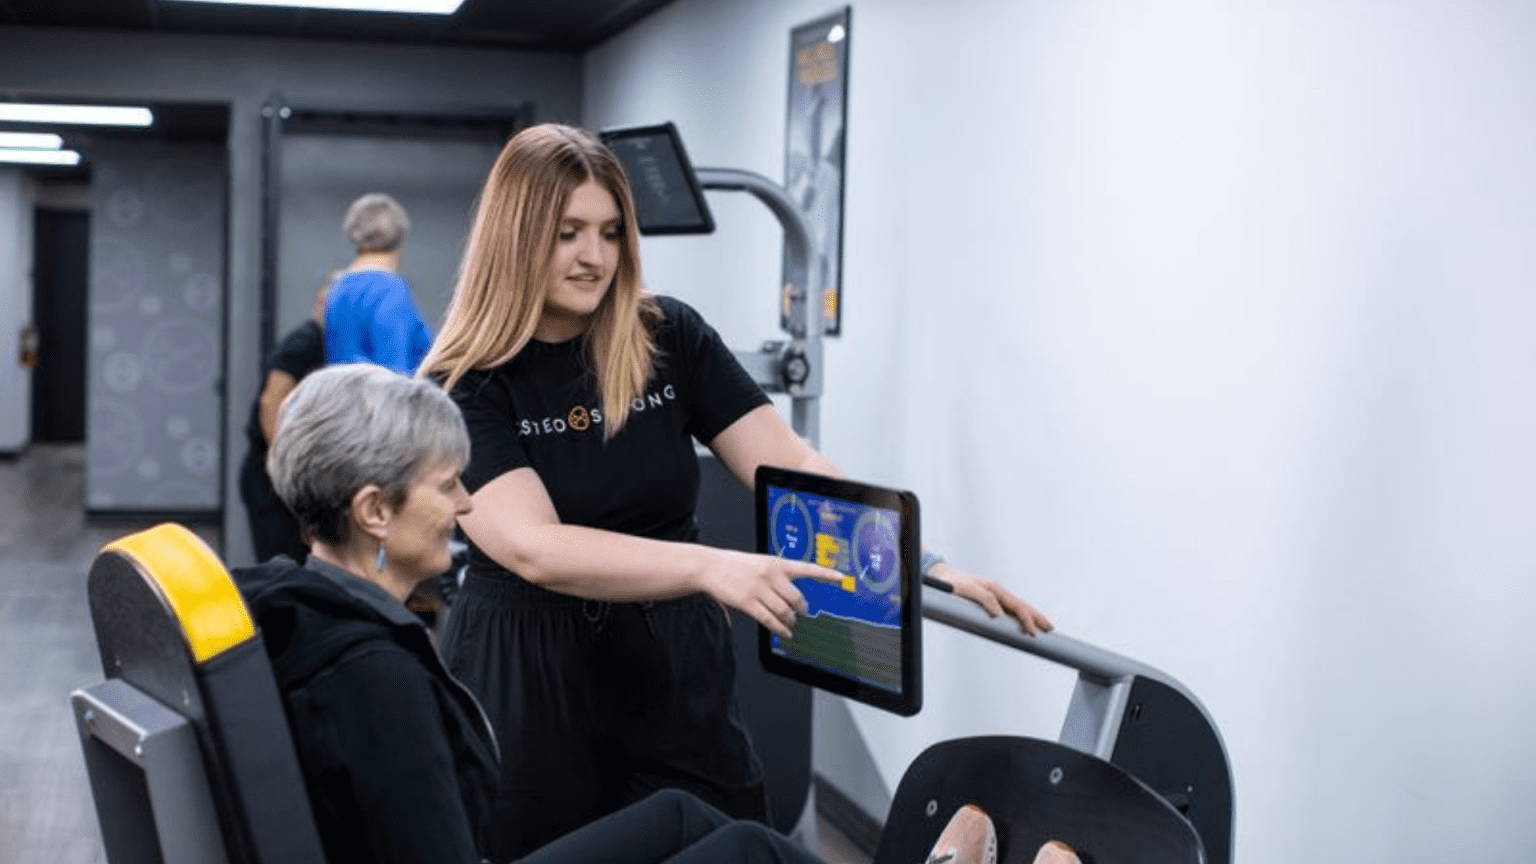 A young woman in an OsteoStrong shirt explains the use of exercise equipment to an older woman, pointing to a screen displaying data.